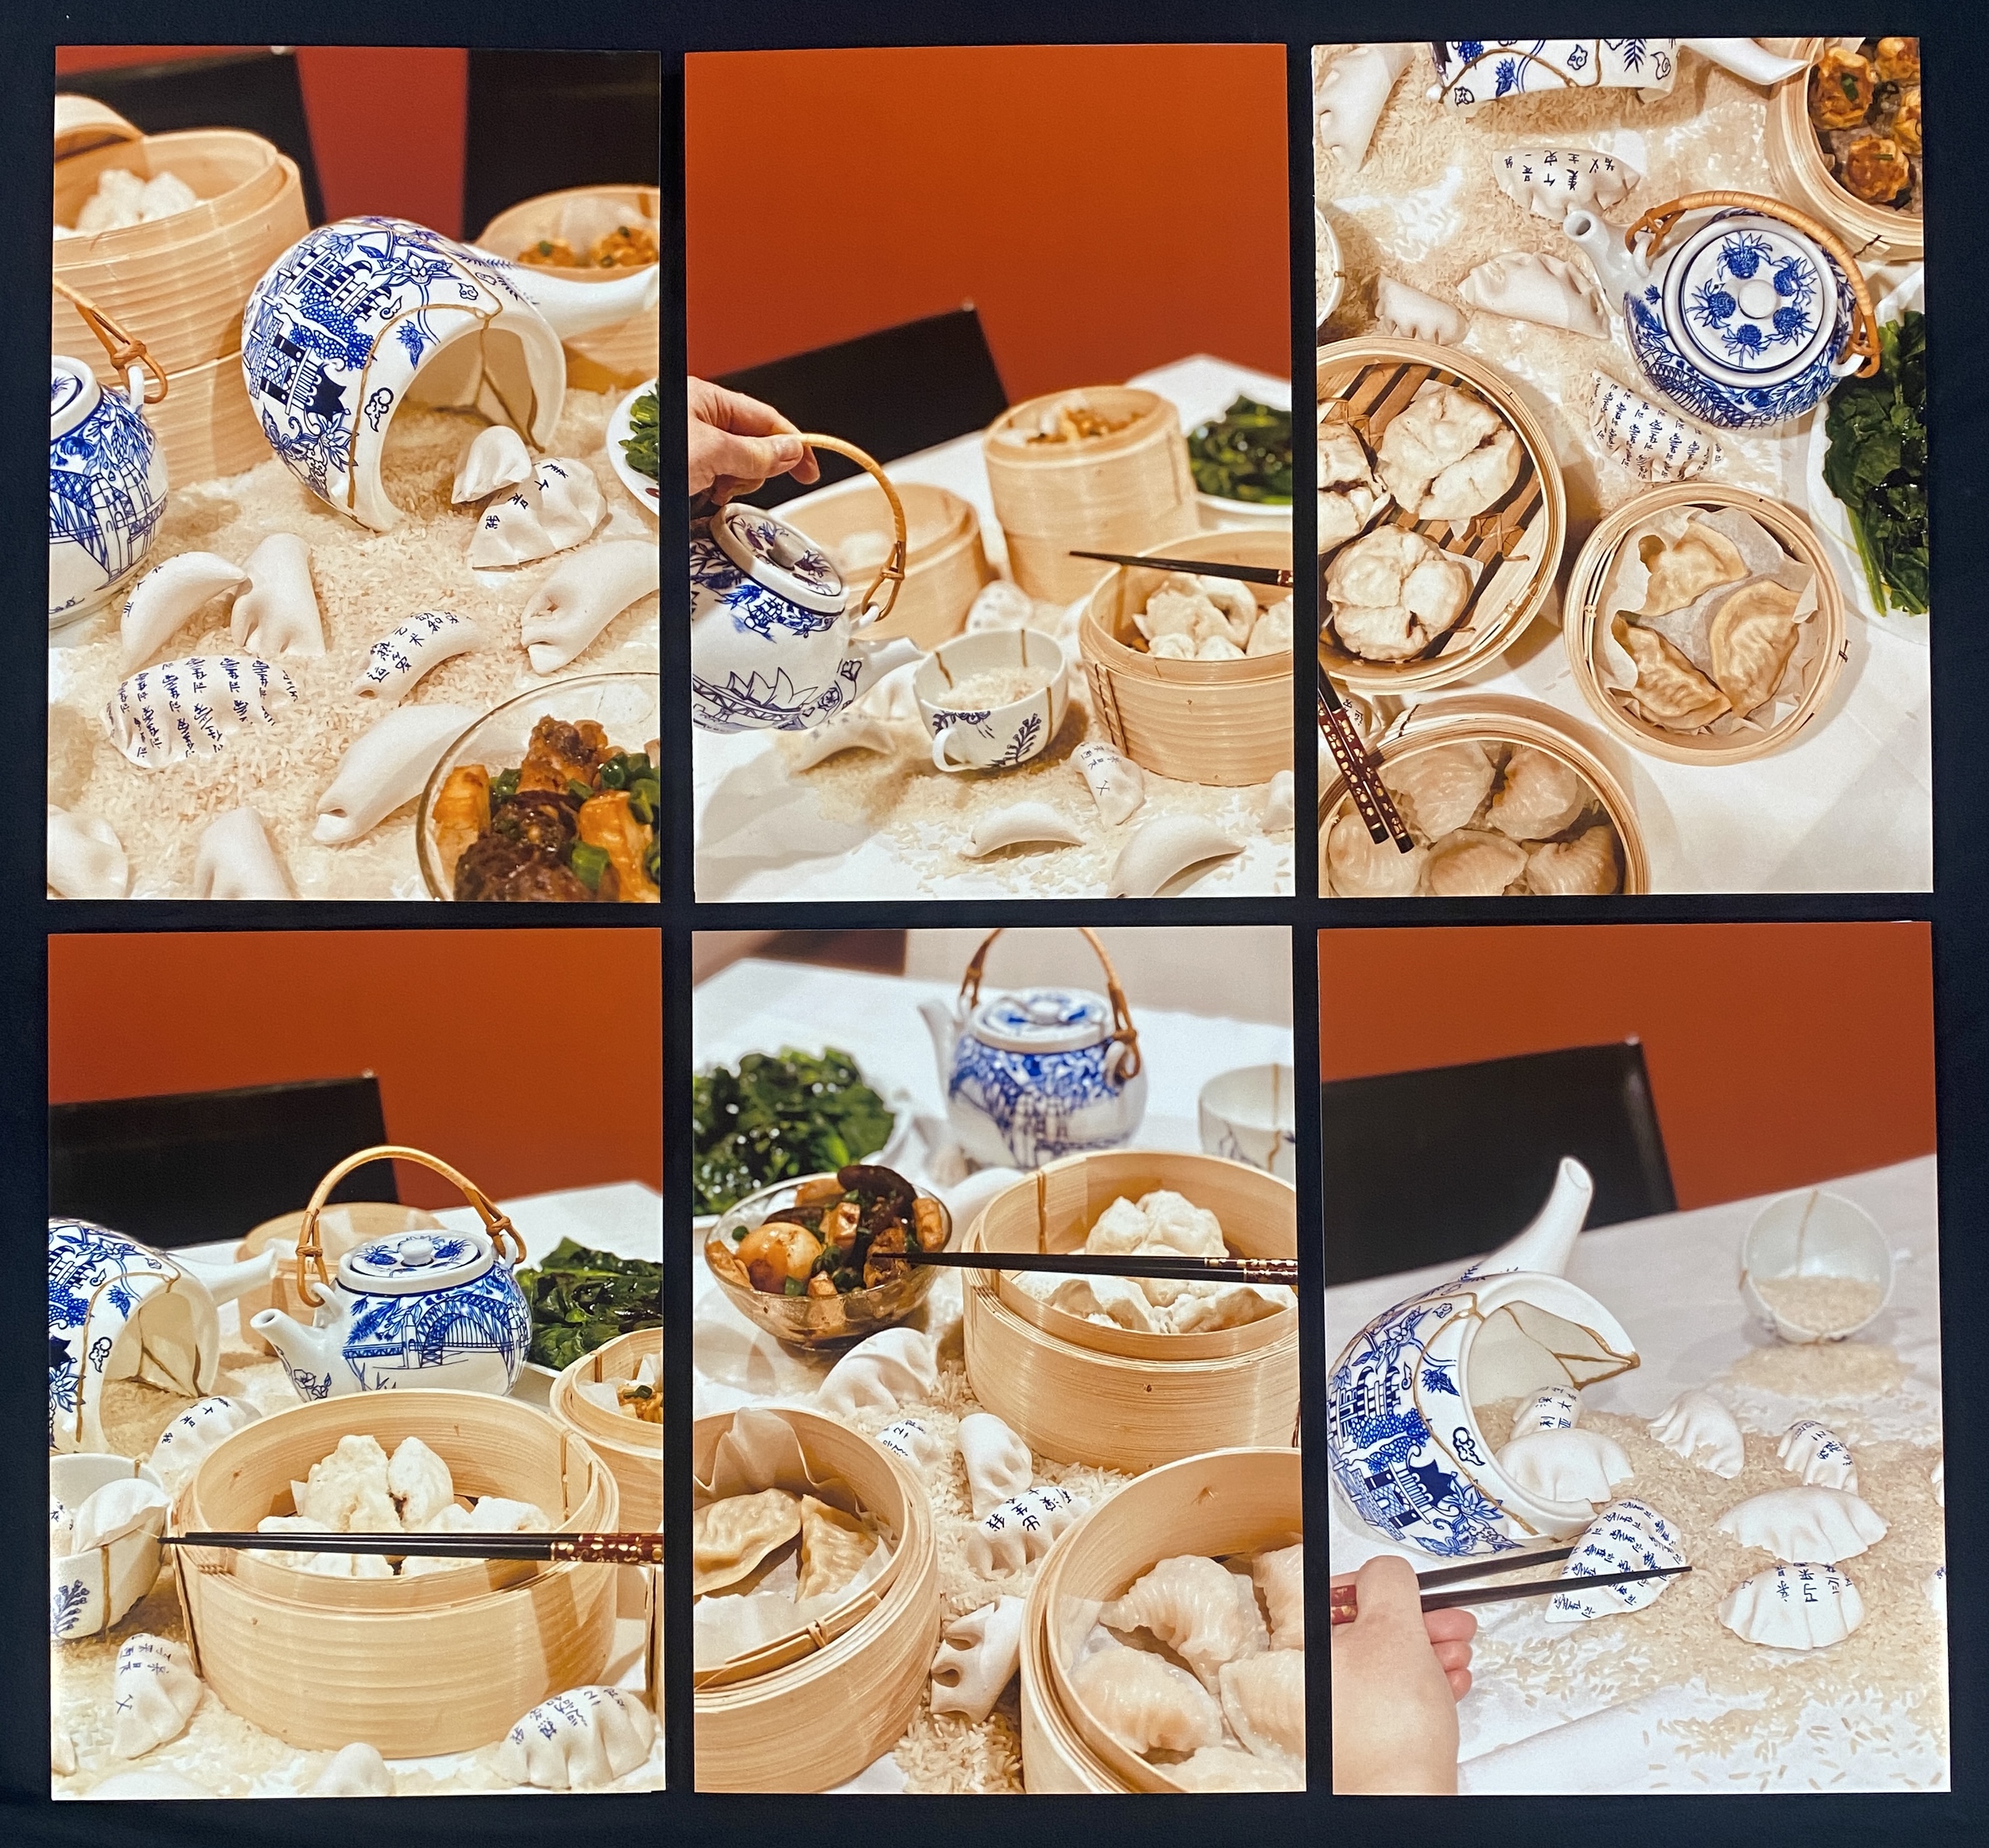 A series of six portrait photographs of a yum cha tablescape with bamboo steamer baskets and white ceramic dumplings with blue Chinese characters written on them.